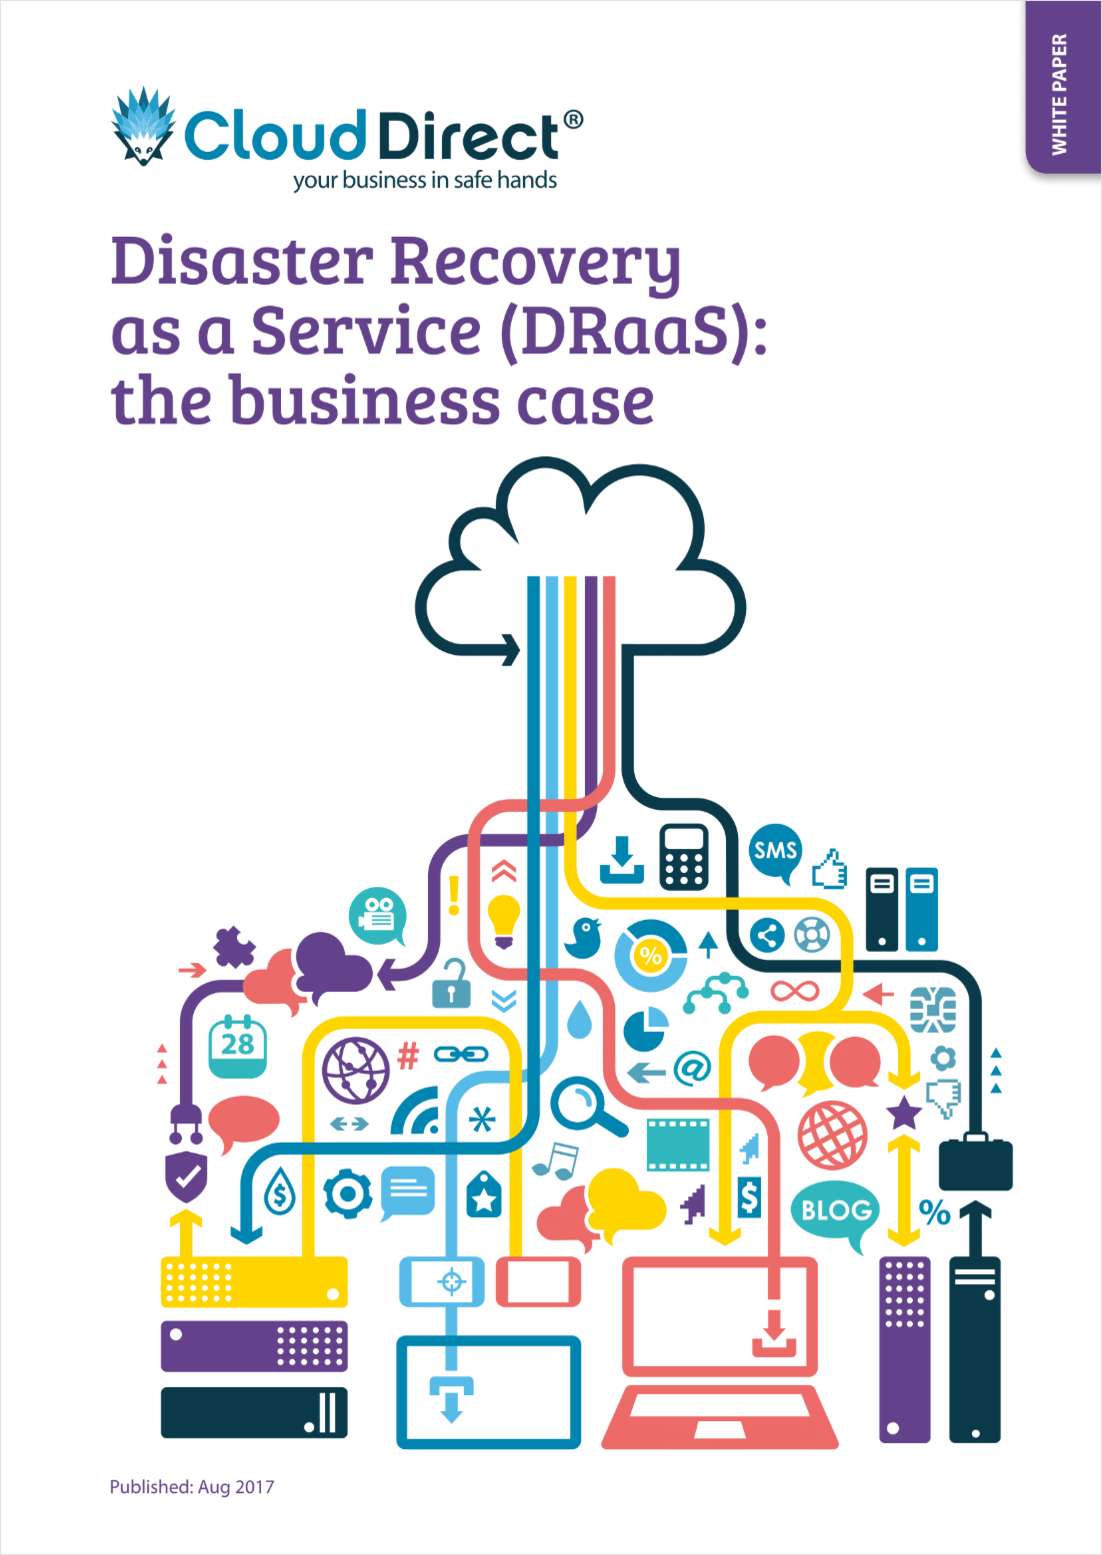 Whitepaper - Disaster Recovery as a Service (DRaaS): the business case